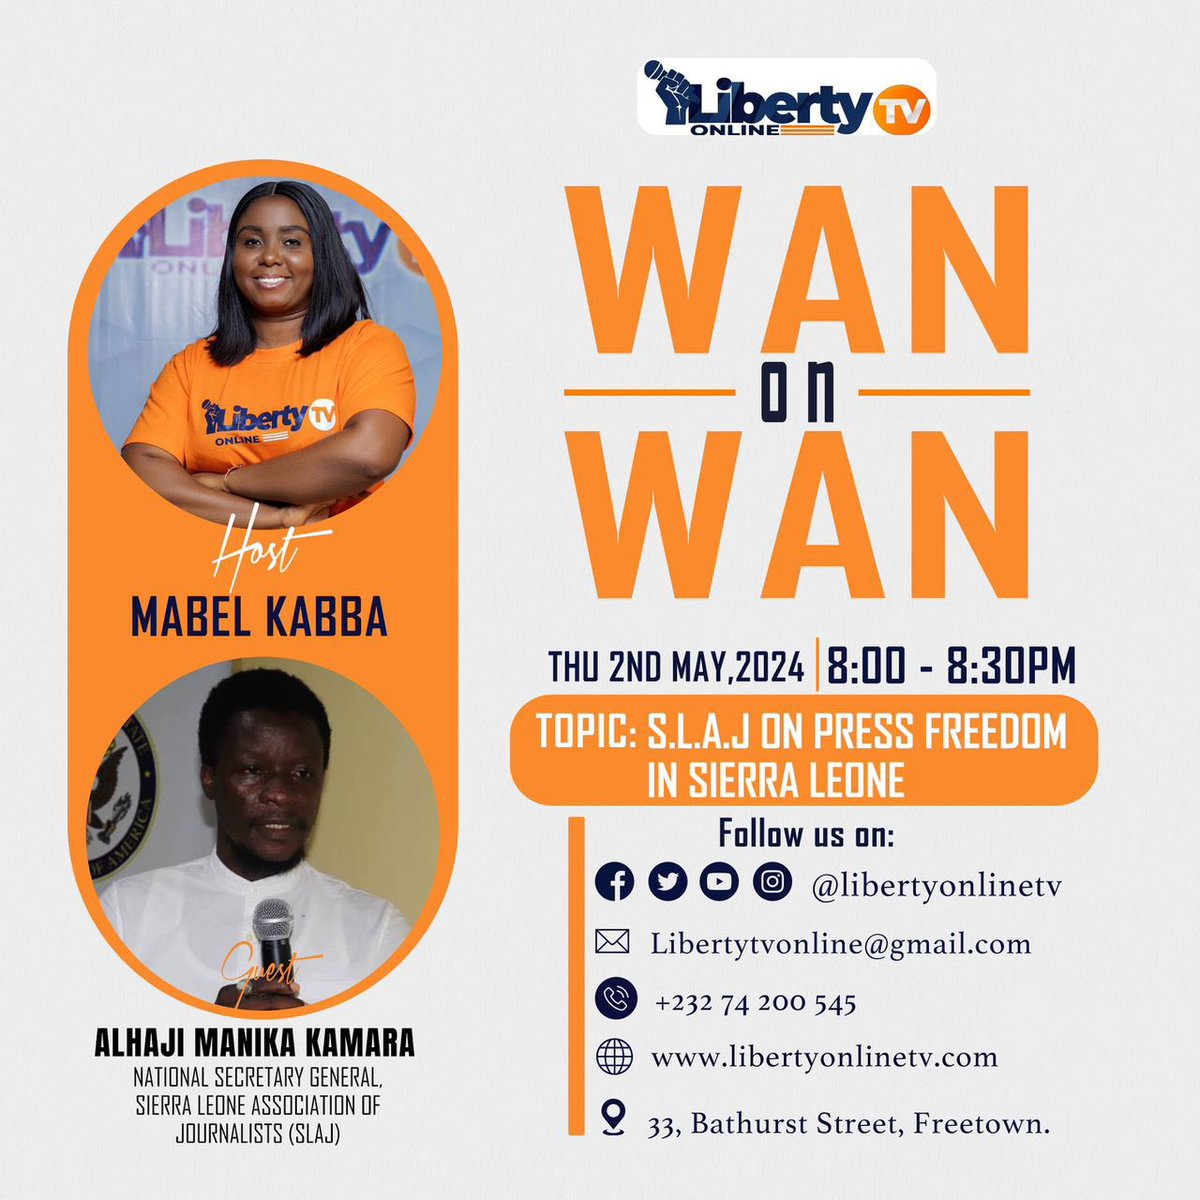 Please join us tonight from 8:00 p.m. to 8:30 p.m. as host Mabel Kabba engages Alhaji Manika Kamara, National Secretary General of the Sierra Leone Association of Journalists (SLAJ), in a discussion on press freedom in Sierra Leone.

#libertyonlinetv 
#free
#fearless
#inclusive